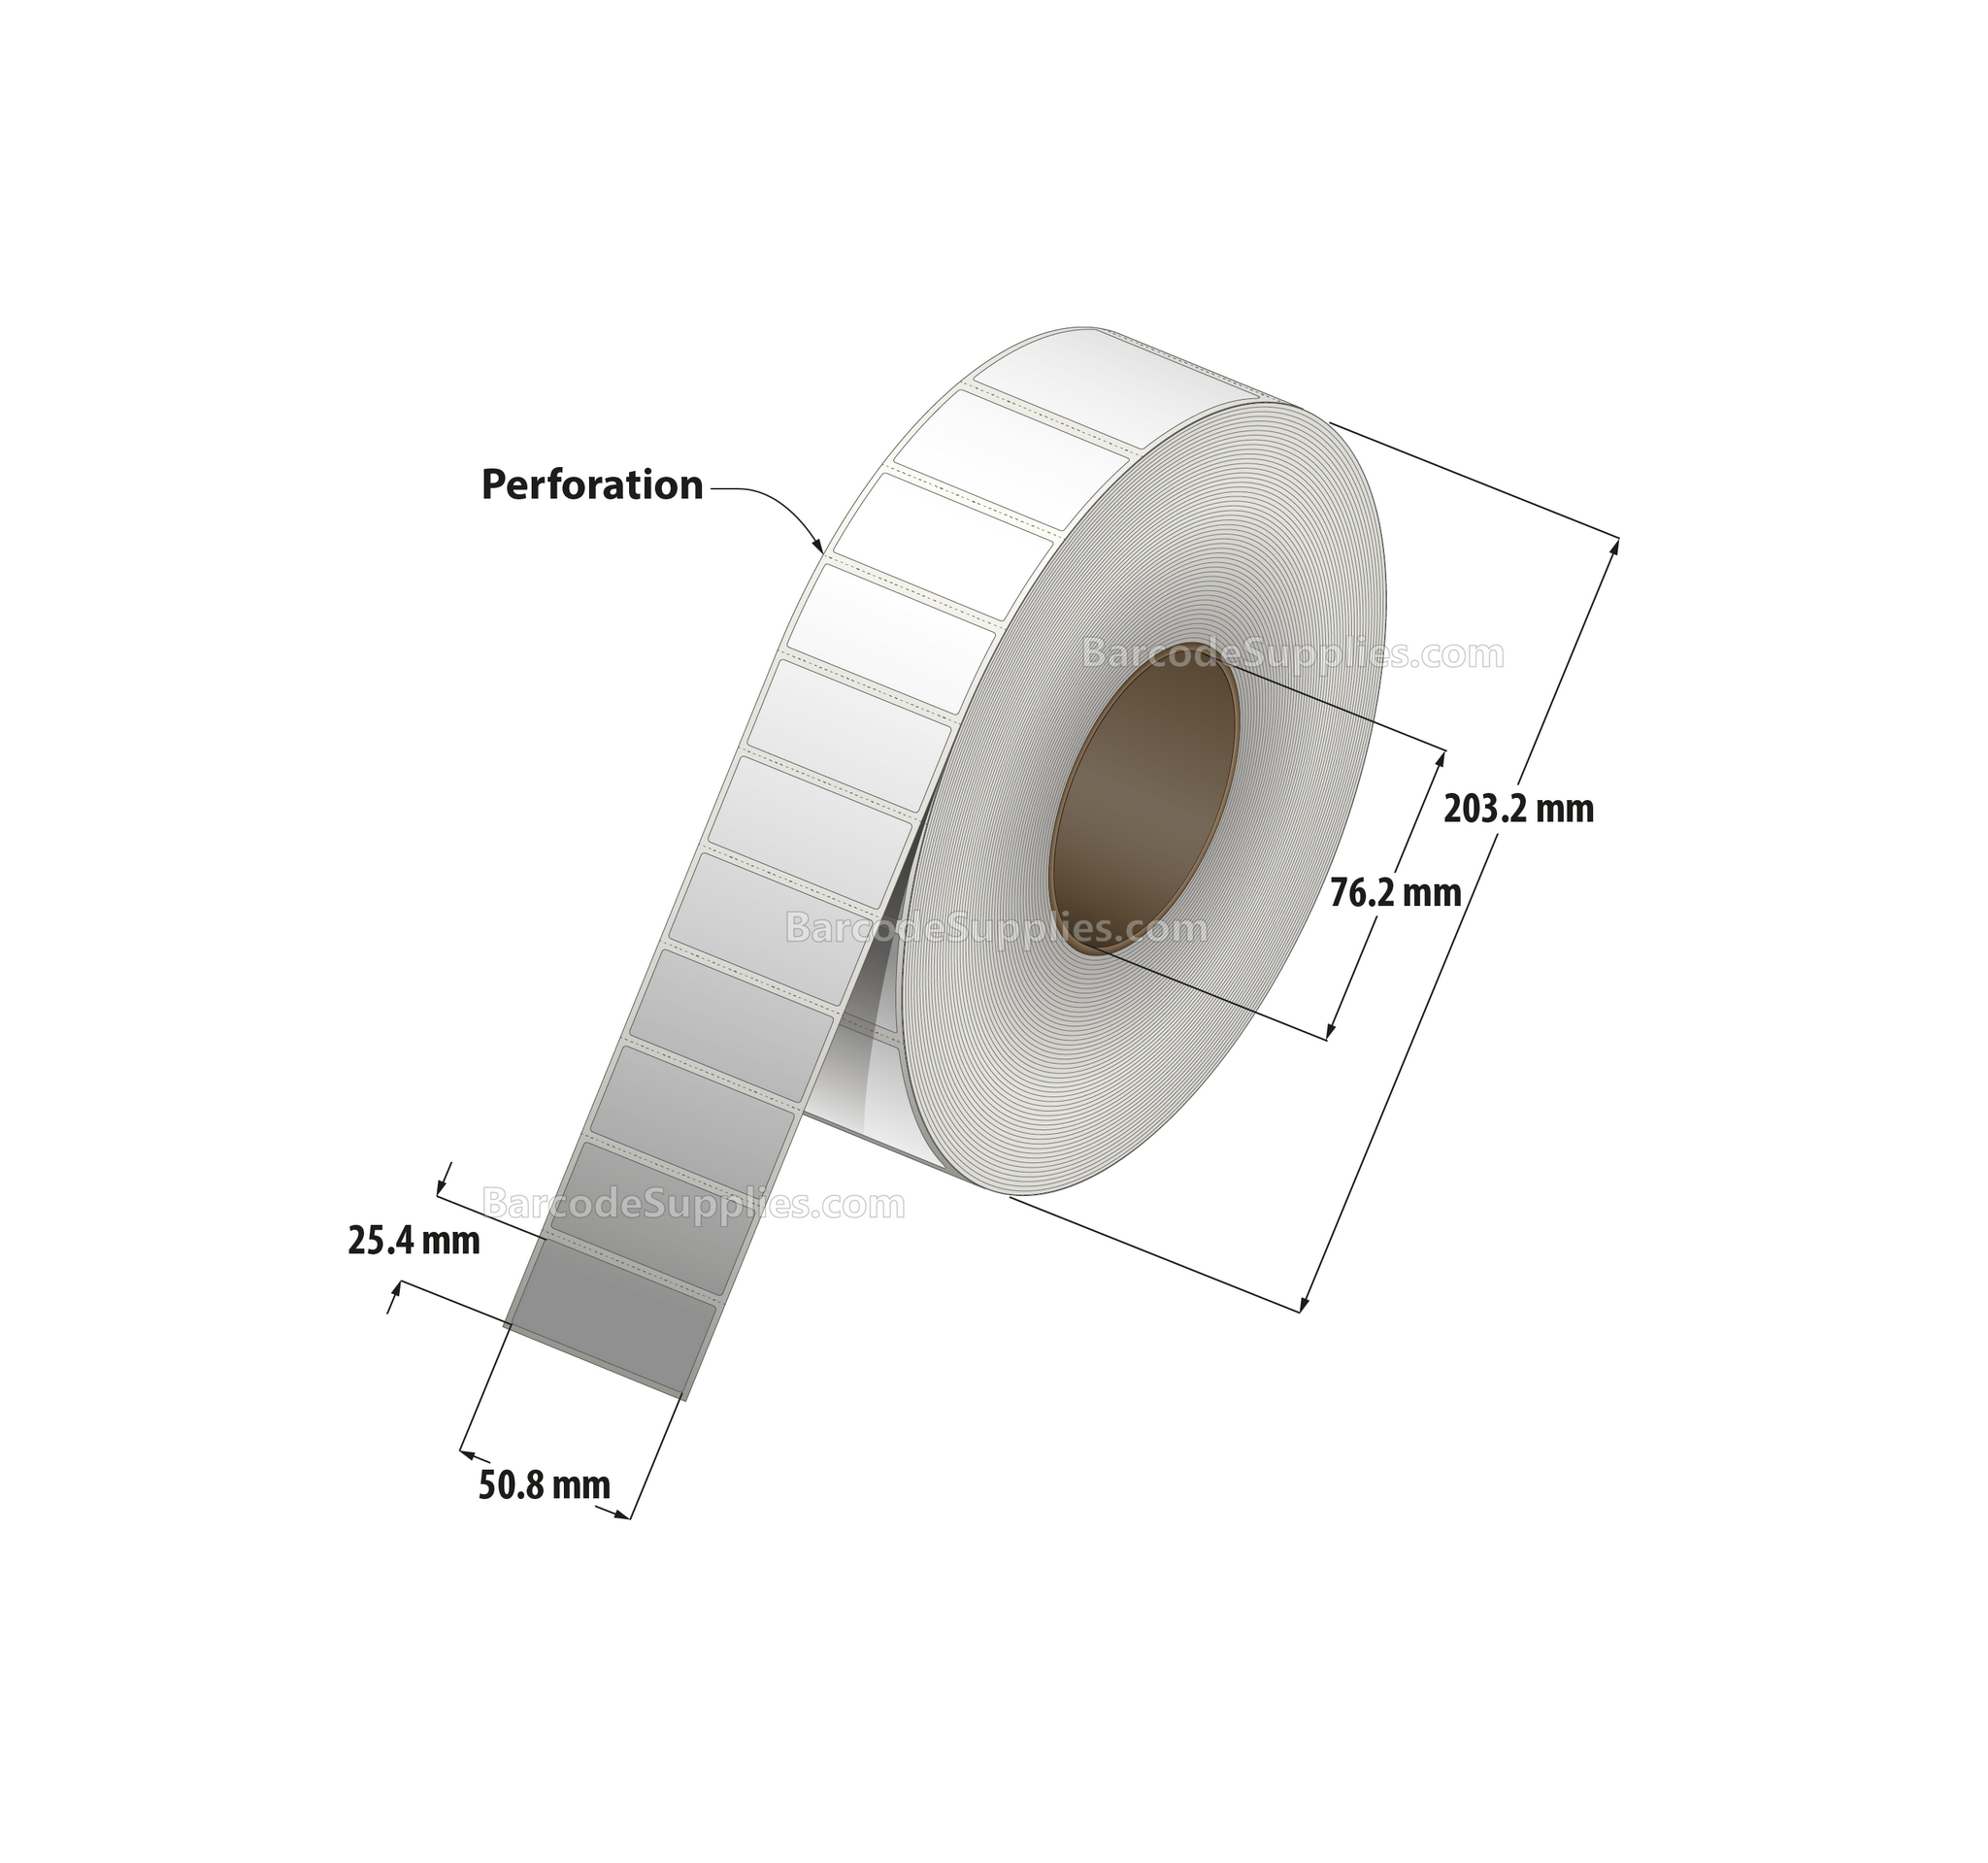 2 x 1 Thermal Transfer White Labels With Rubber Adhesive - Perforated - 5100 Labels Per Roll - Carton Of 8 Rolls - 40800 Labels Total - MPN: CTT200100-3P